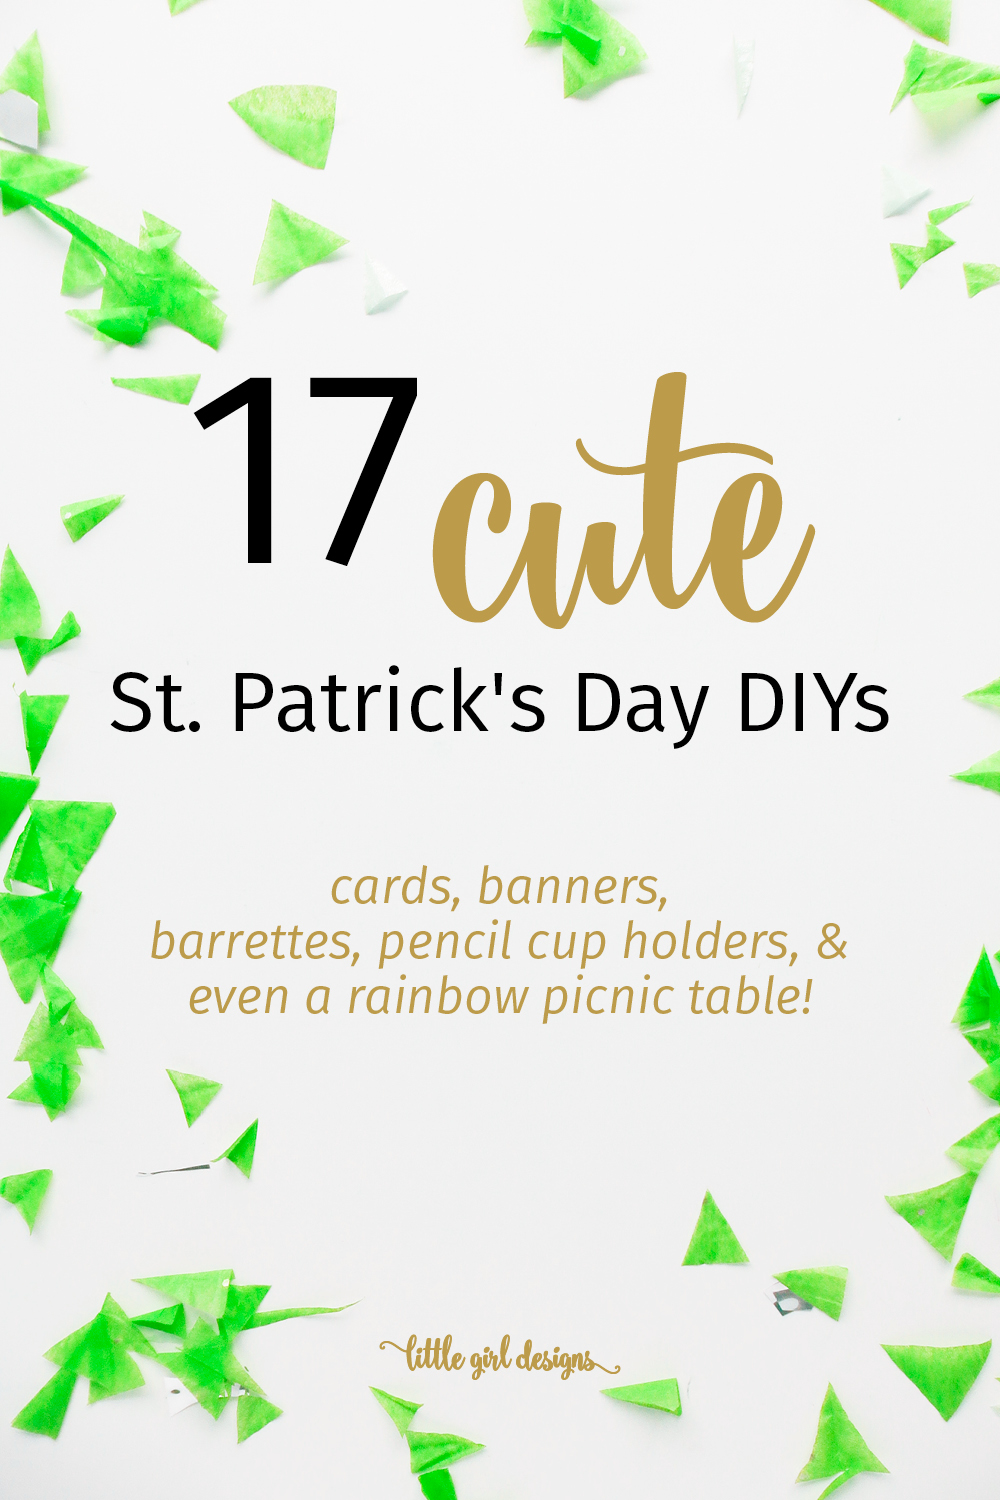 So fun! I love the variety of cute and simple St. Patrick's Day DIYs in this list! Cards, Kawaii-inspired pencil jars, a crocheted coffee cozy, and more!